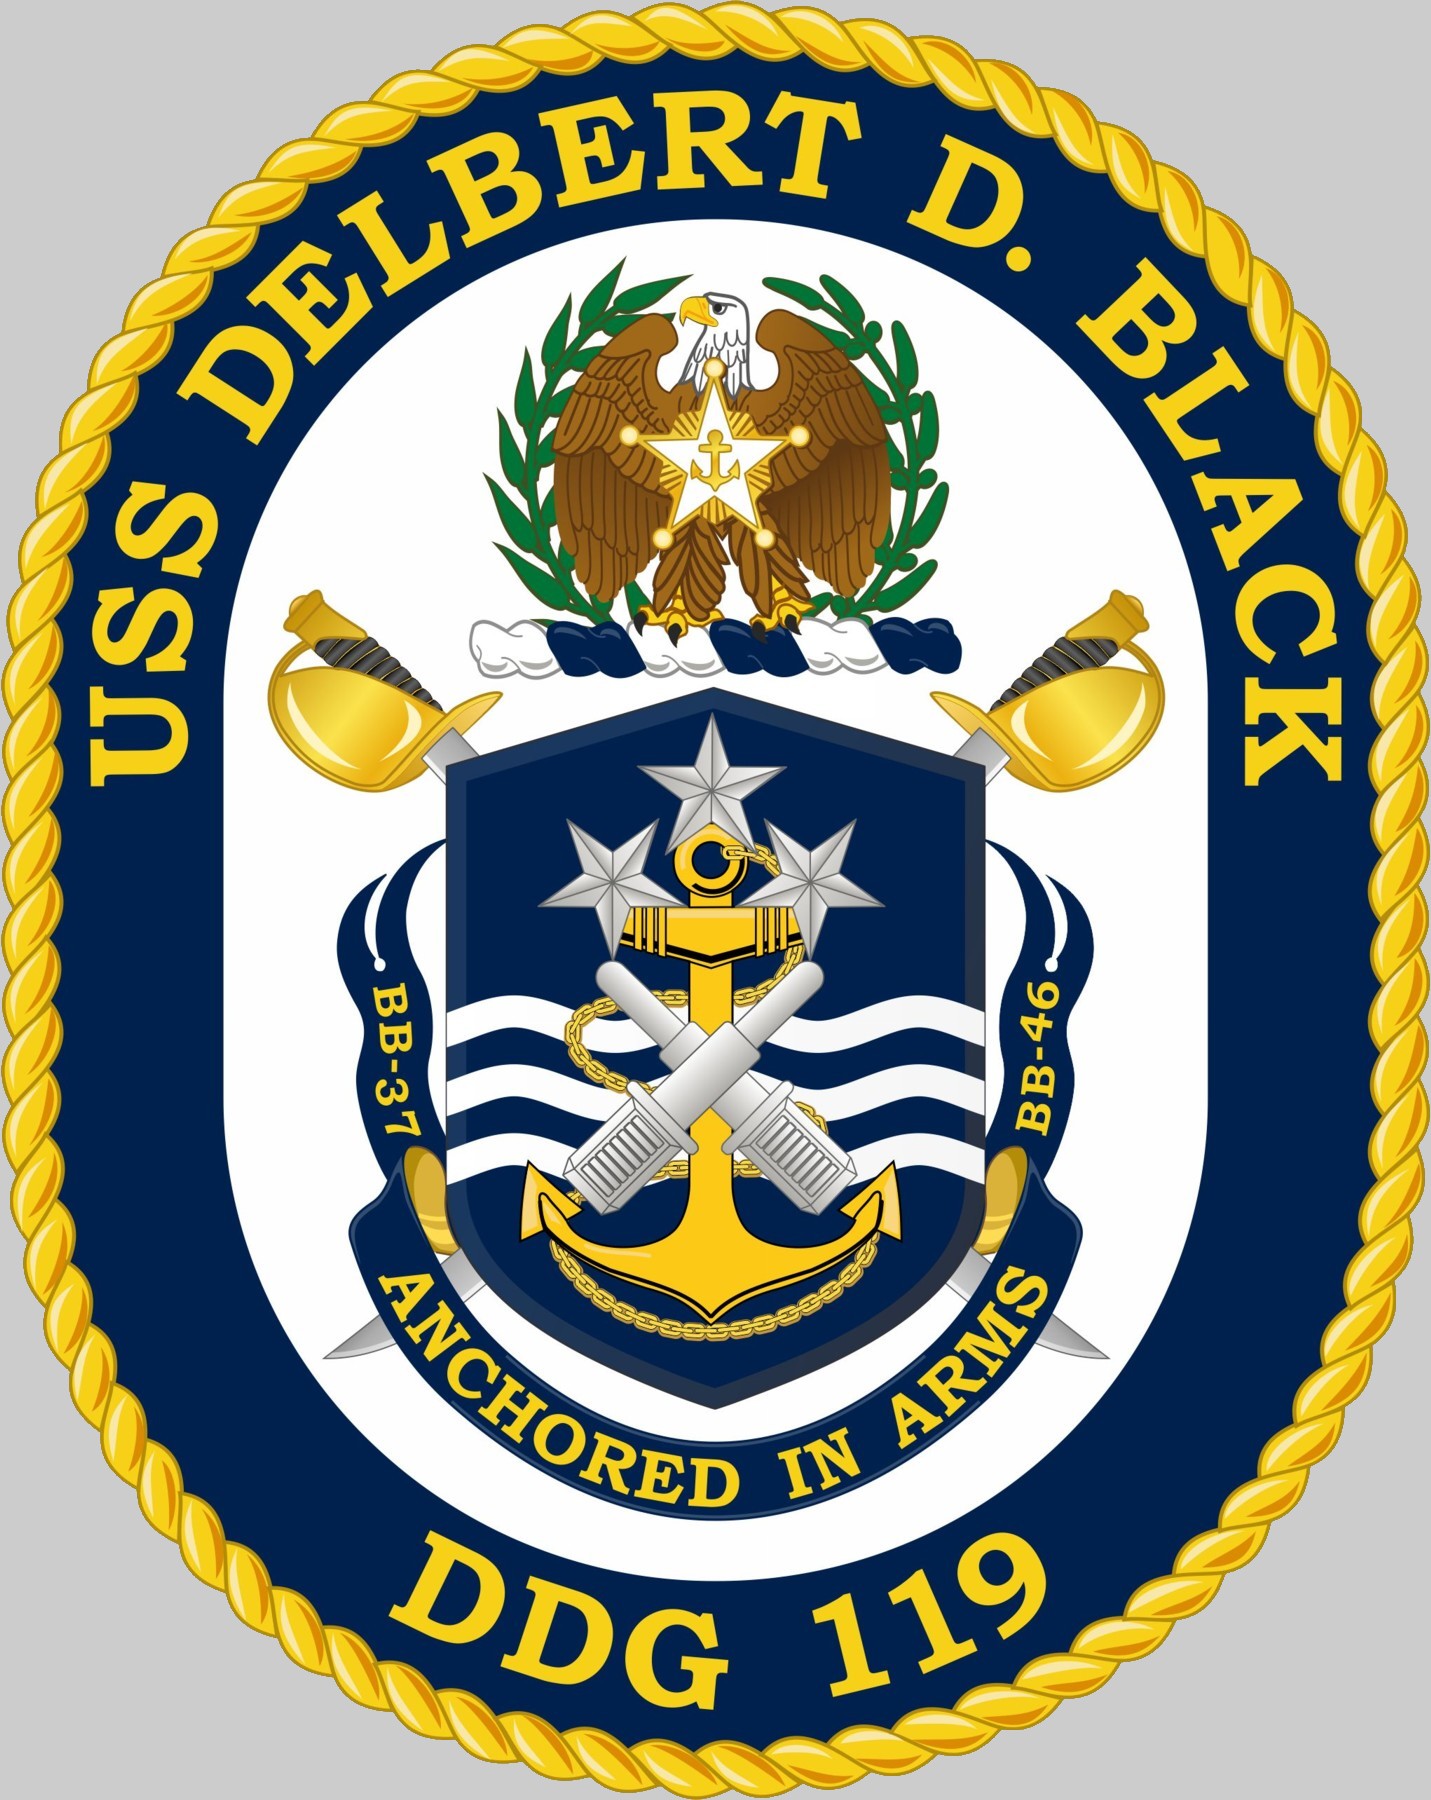 ddg-119 uss delbert d. black insignia crest patch badge arleigh burke class guided missile destroyer us navy 02c